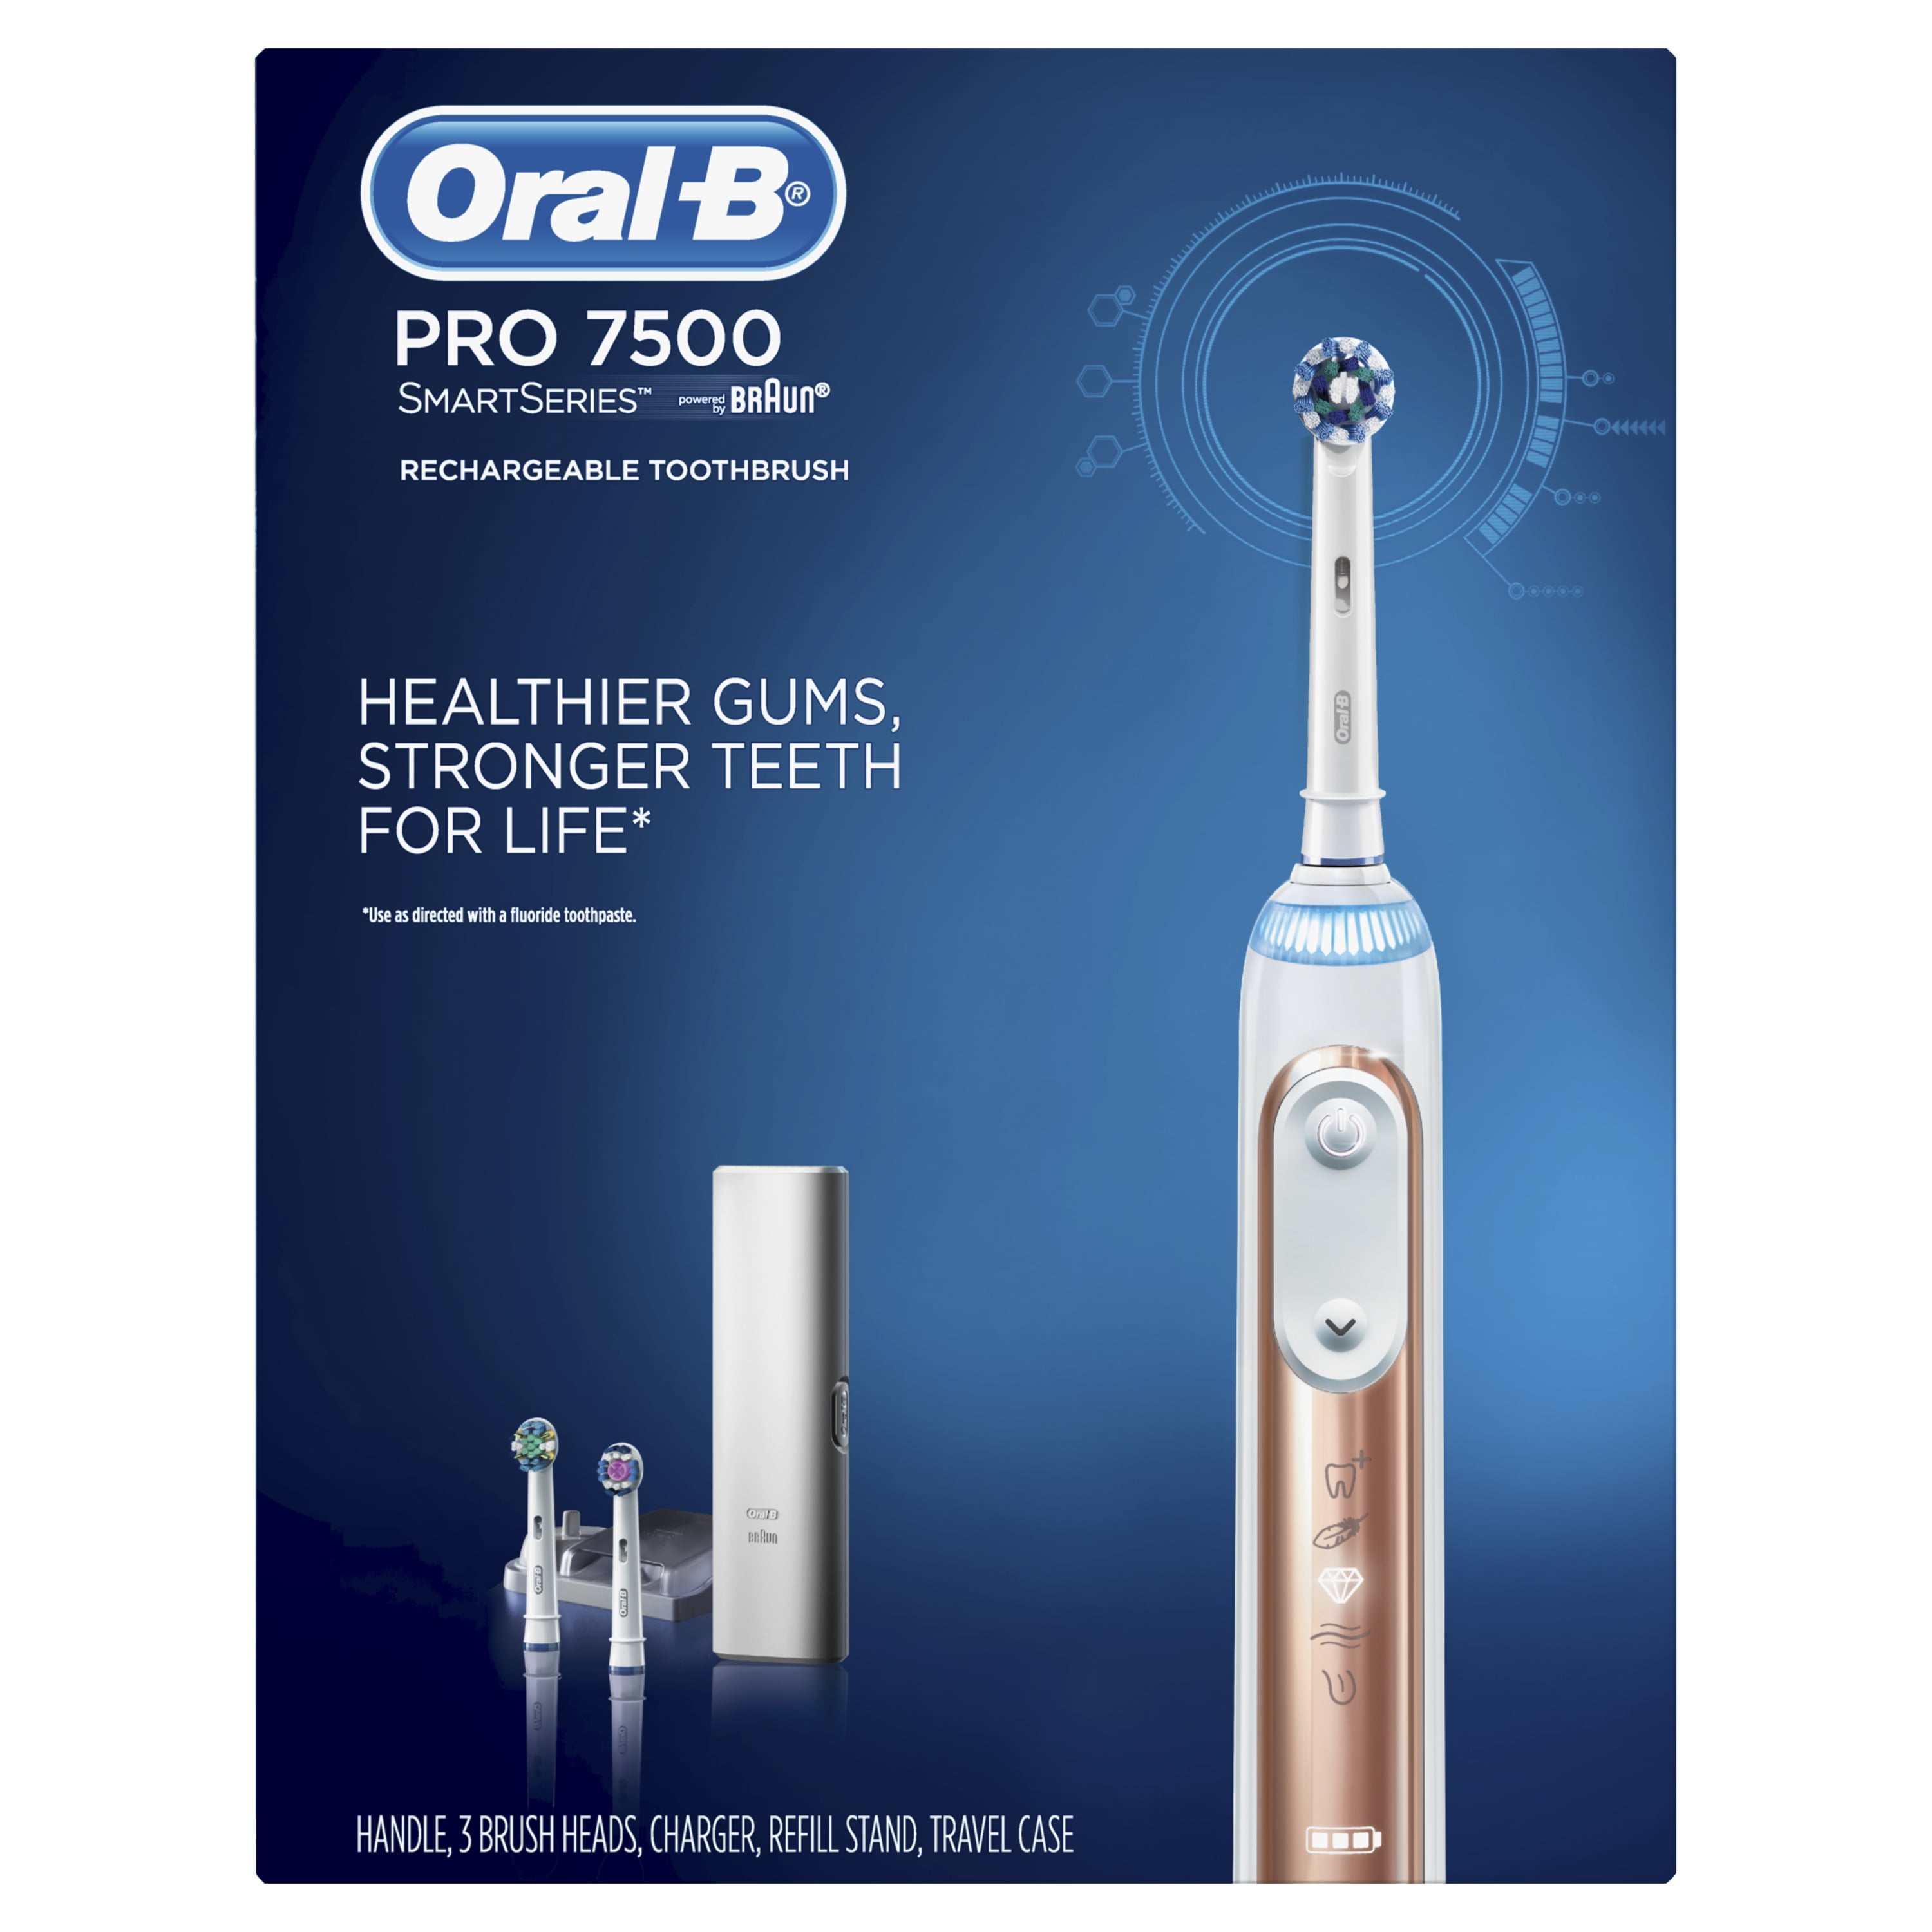 oral-b-pro-7500-30-rebate-eligible-power-rechargeable-electric